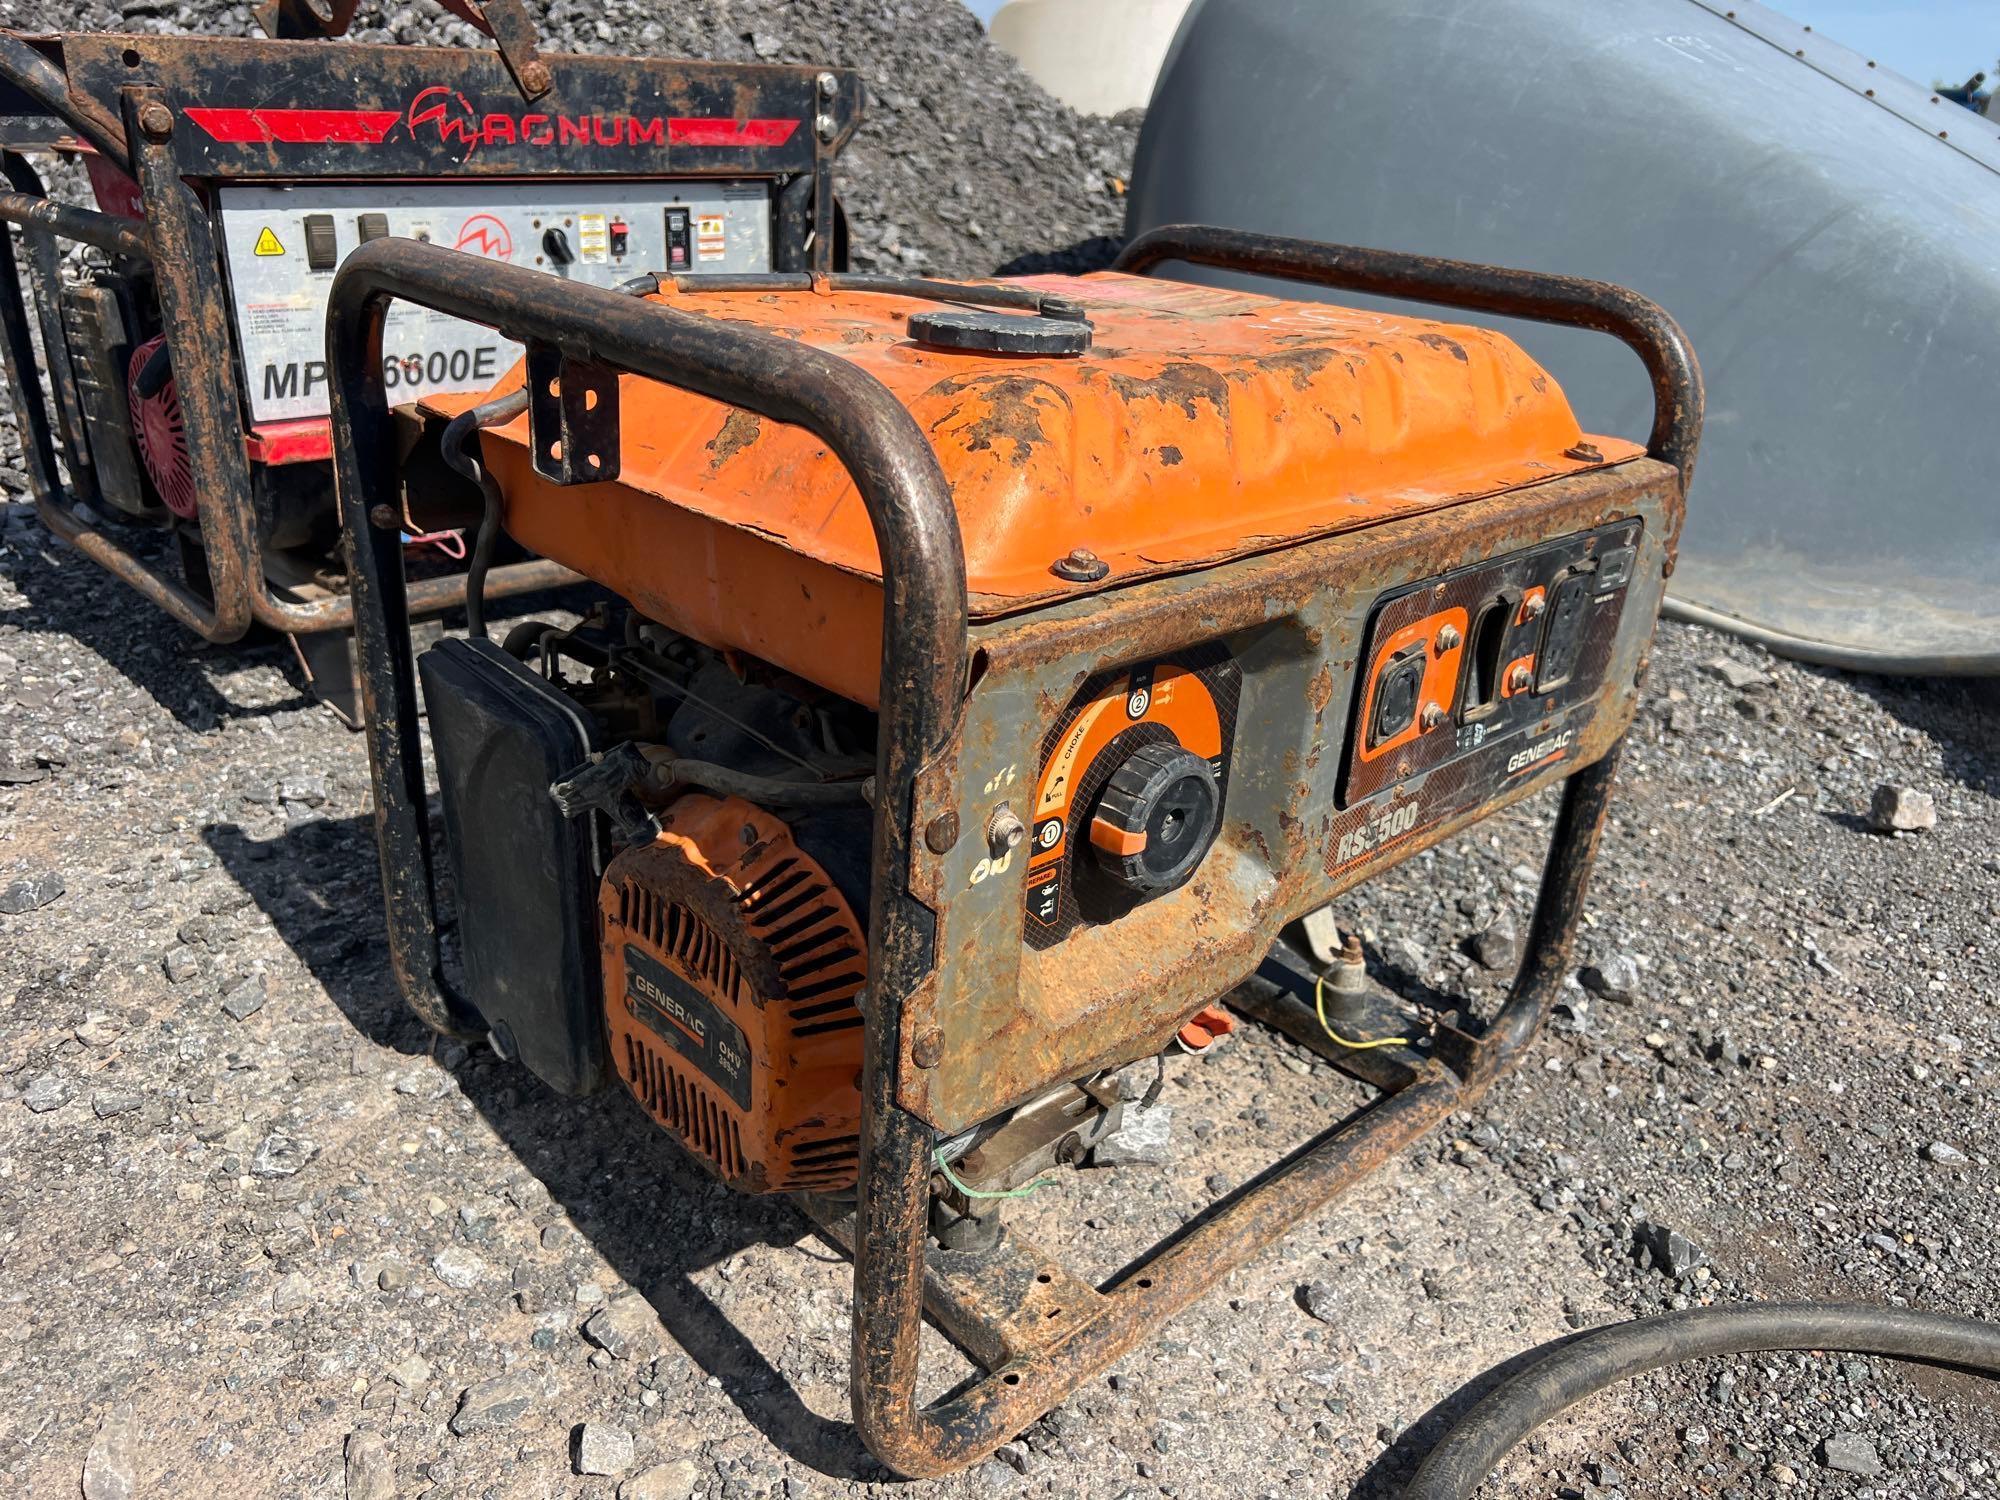 GENERAC RS5500 GENERATOR SUPPORT EQUIPMENT powered by gas engine.